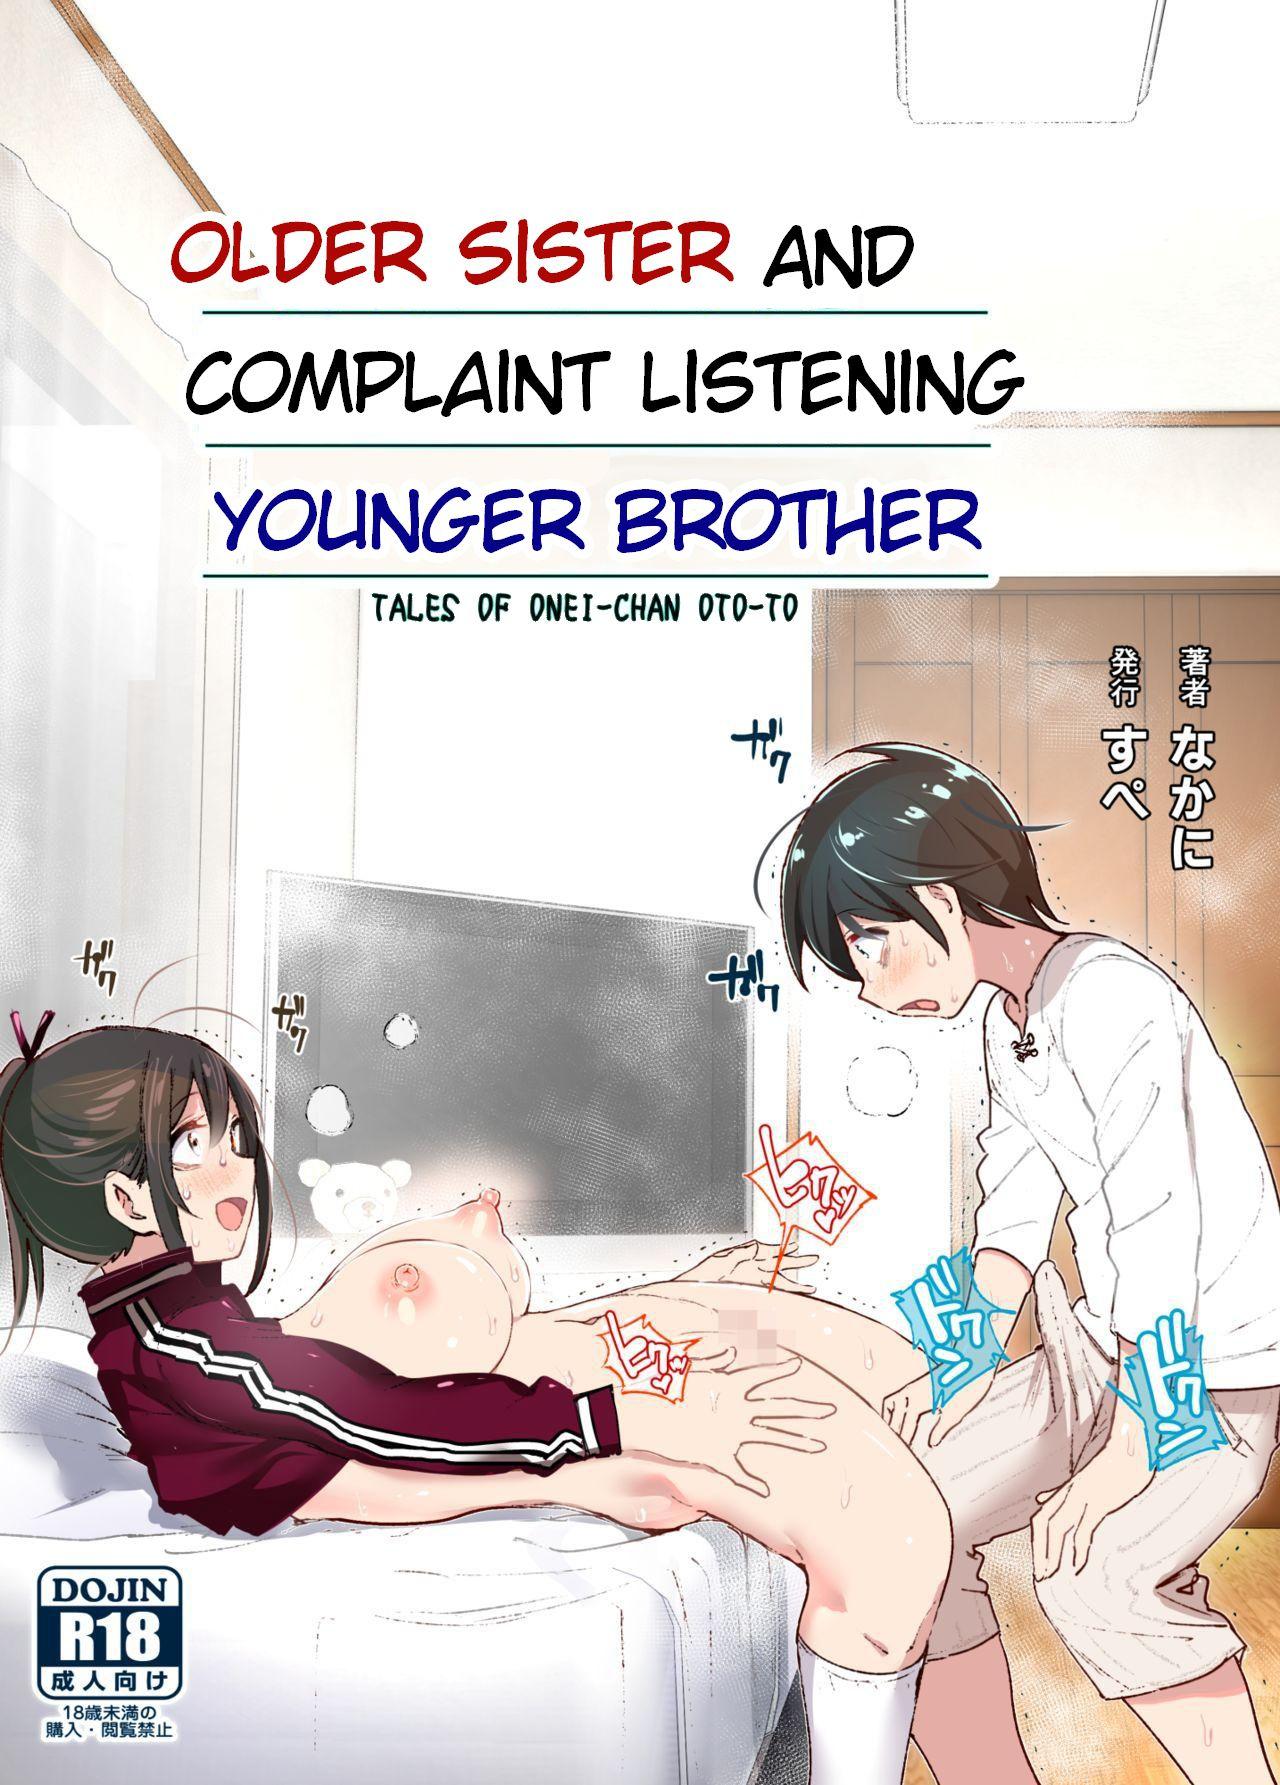 [Supe (Nakani)] Onei-chan to Guchi o Kiite Ageru Otouto no Hanashi - Tales of Onei-chan Oto-to | Older Sister and Complaint Listening Younger Brother [English] [Decensored] 0